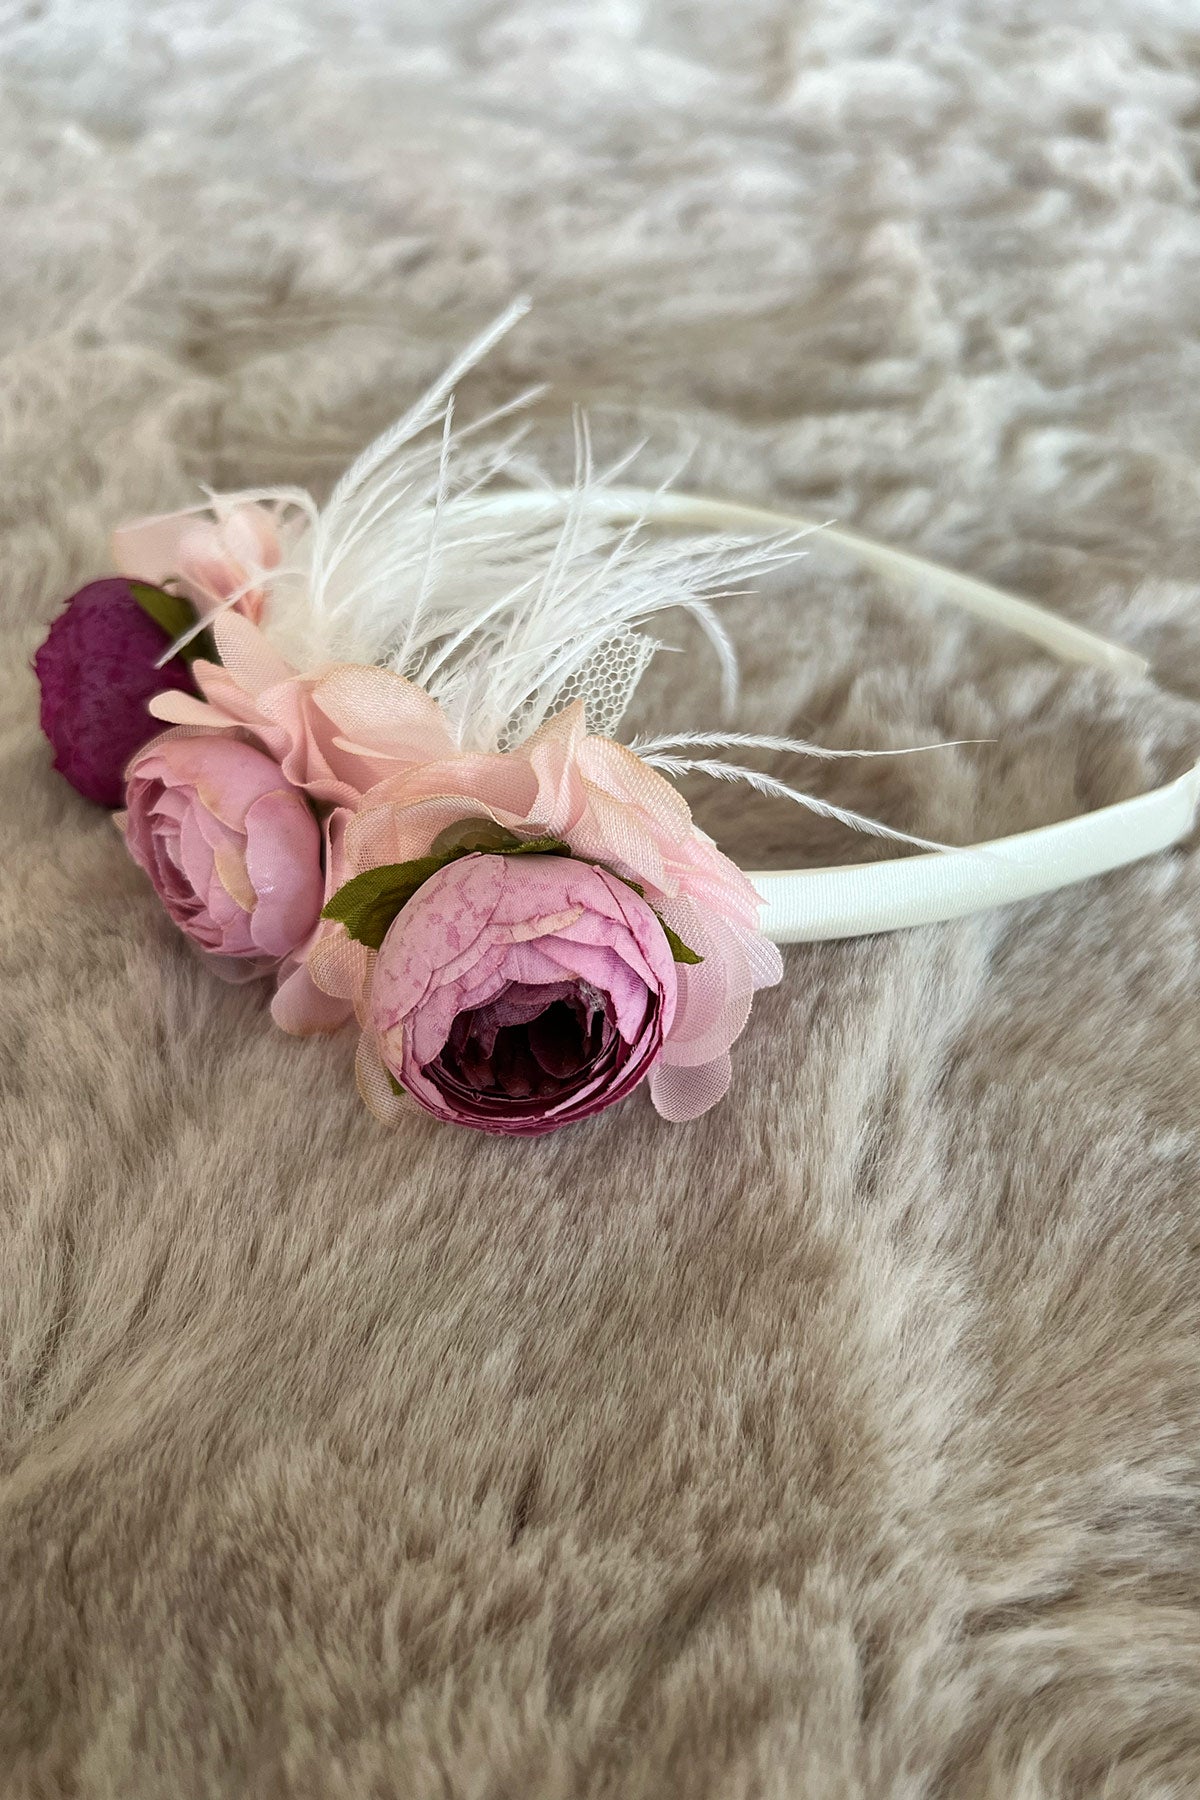 Shopymommy 71009 Rose Themed Maternity Crown Dried Rose